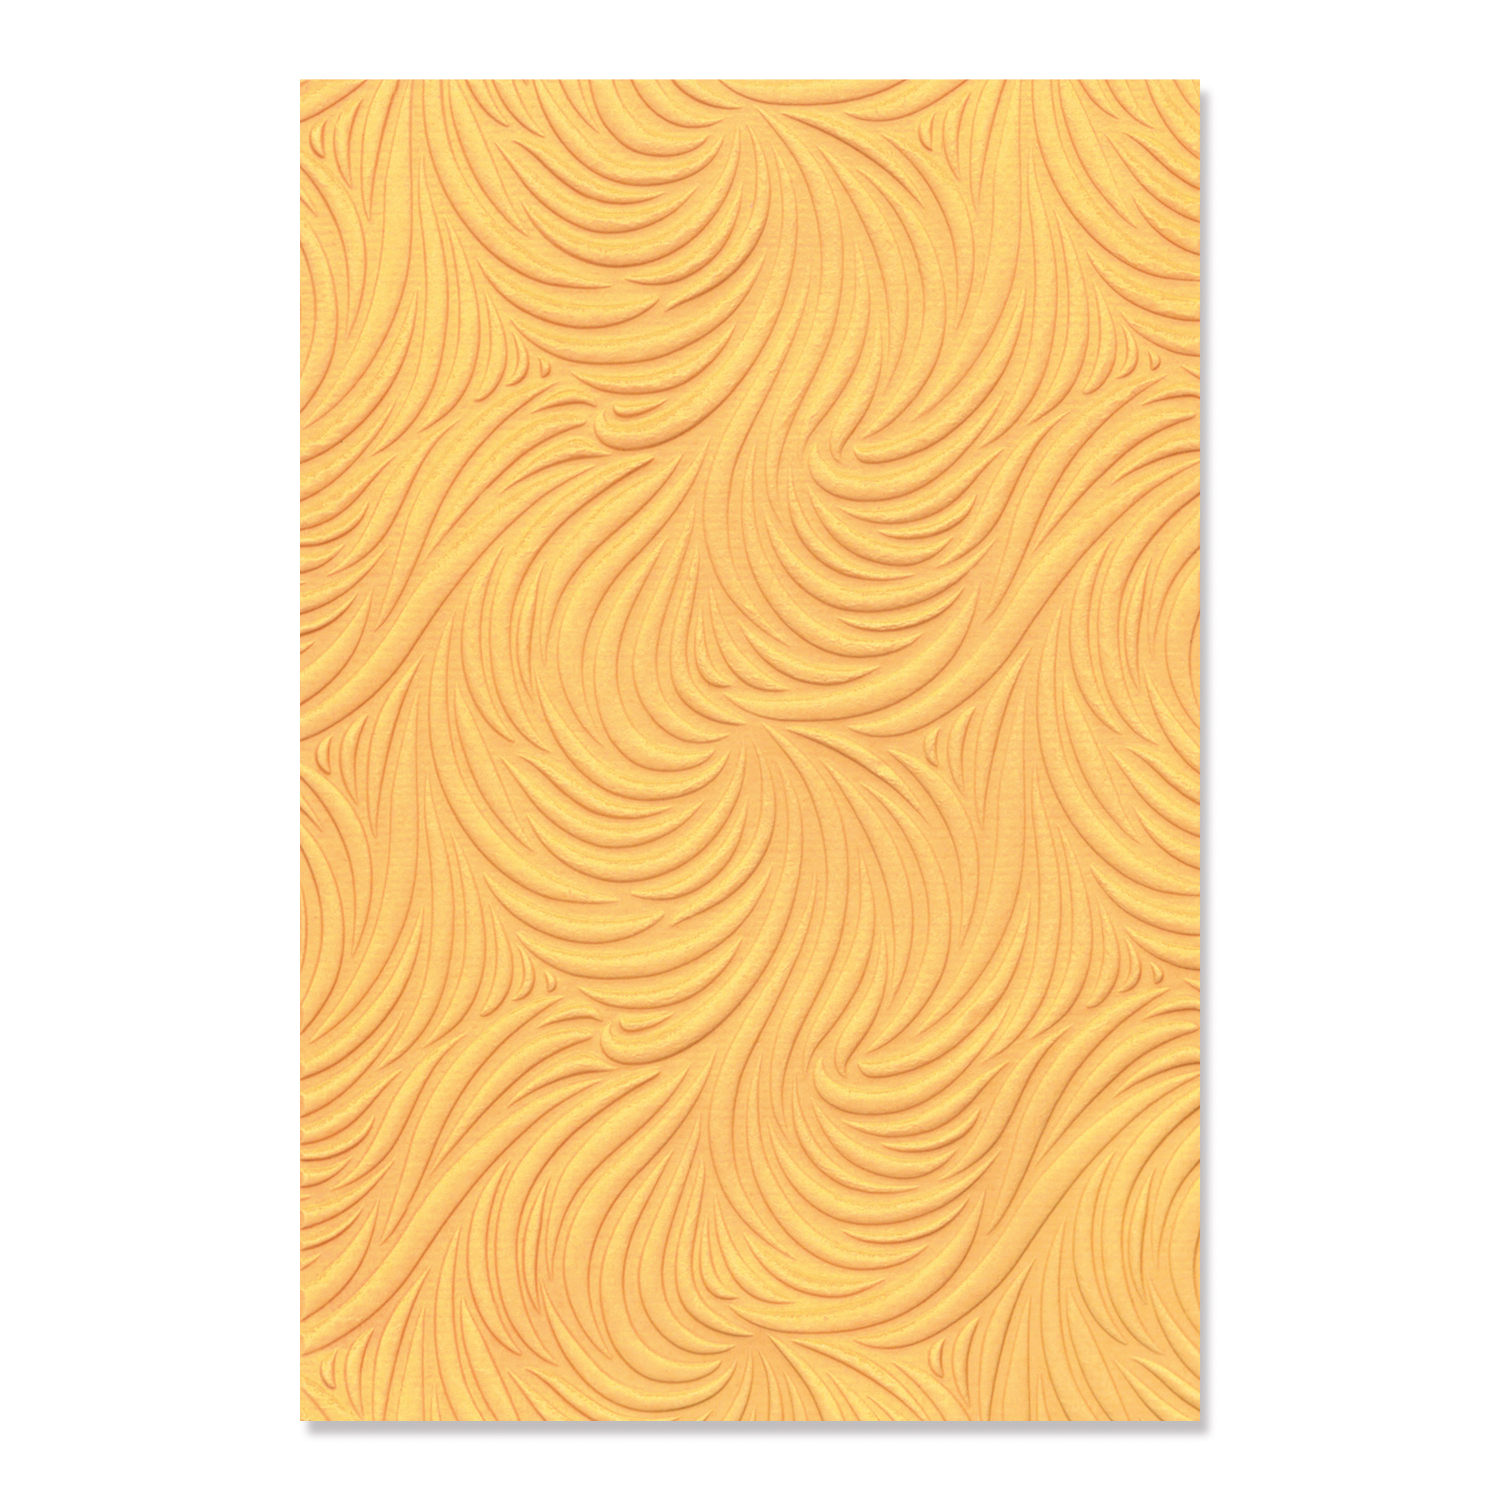 Sizzix 3-D Textured Impressions Embossing Folder - Flowing Waves 666051